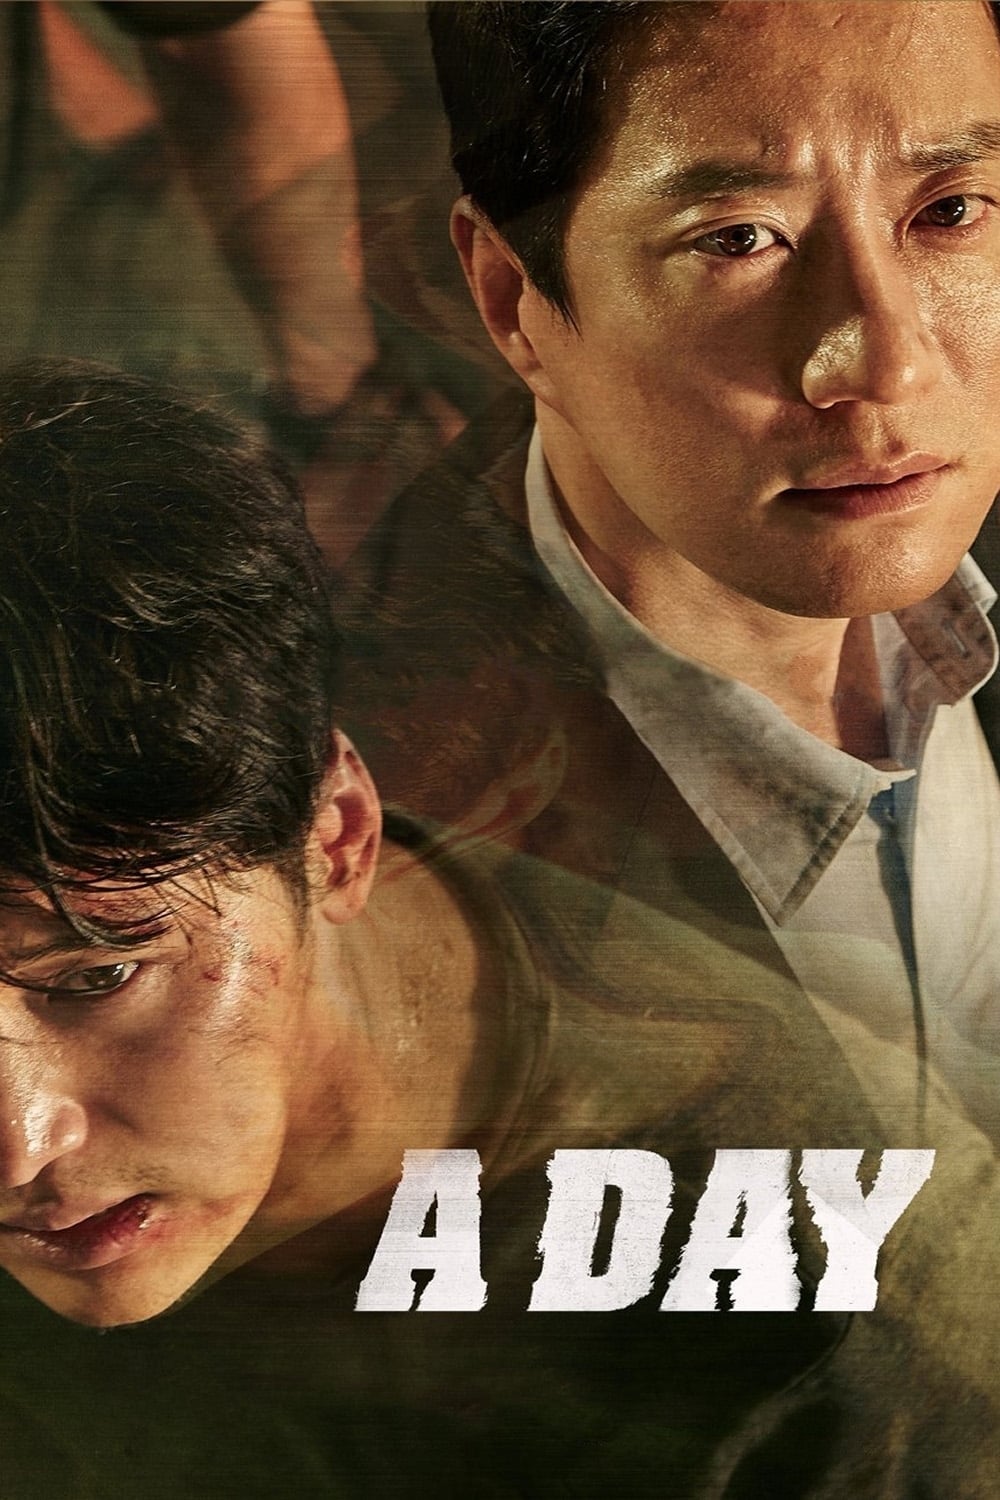 A Day (2017)